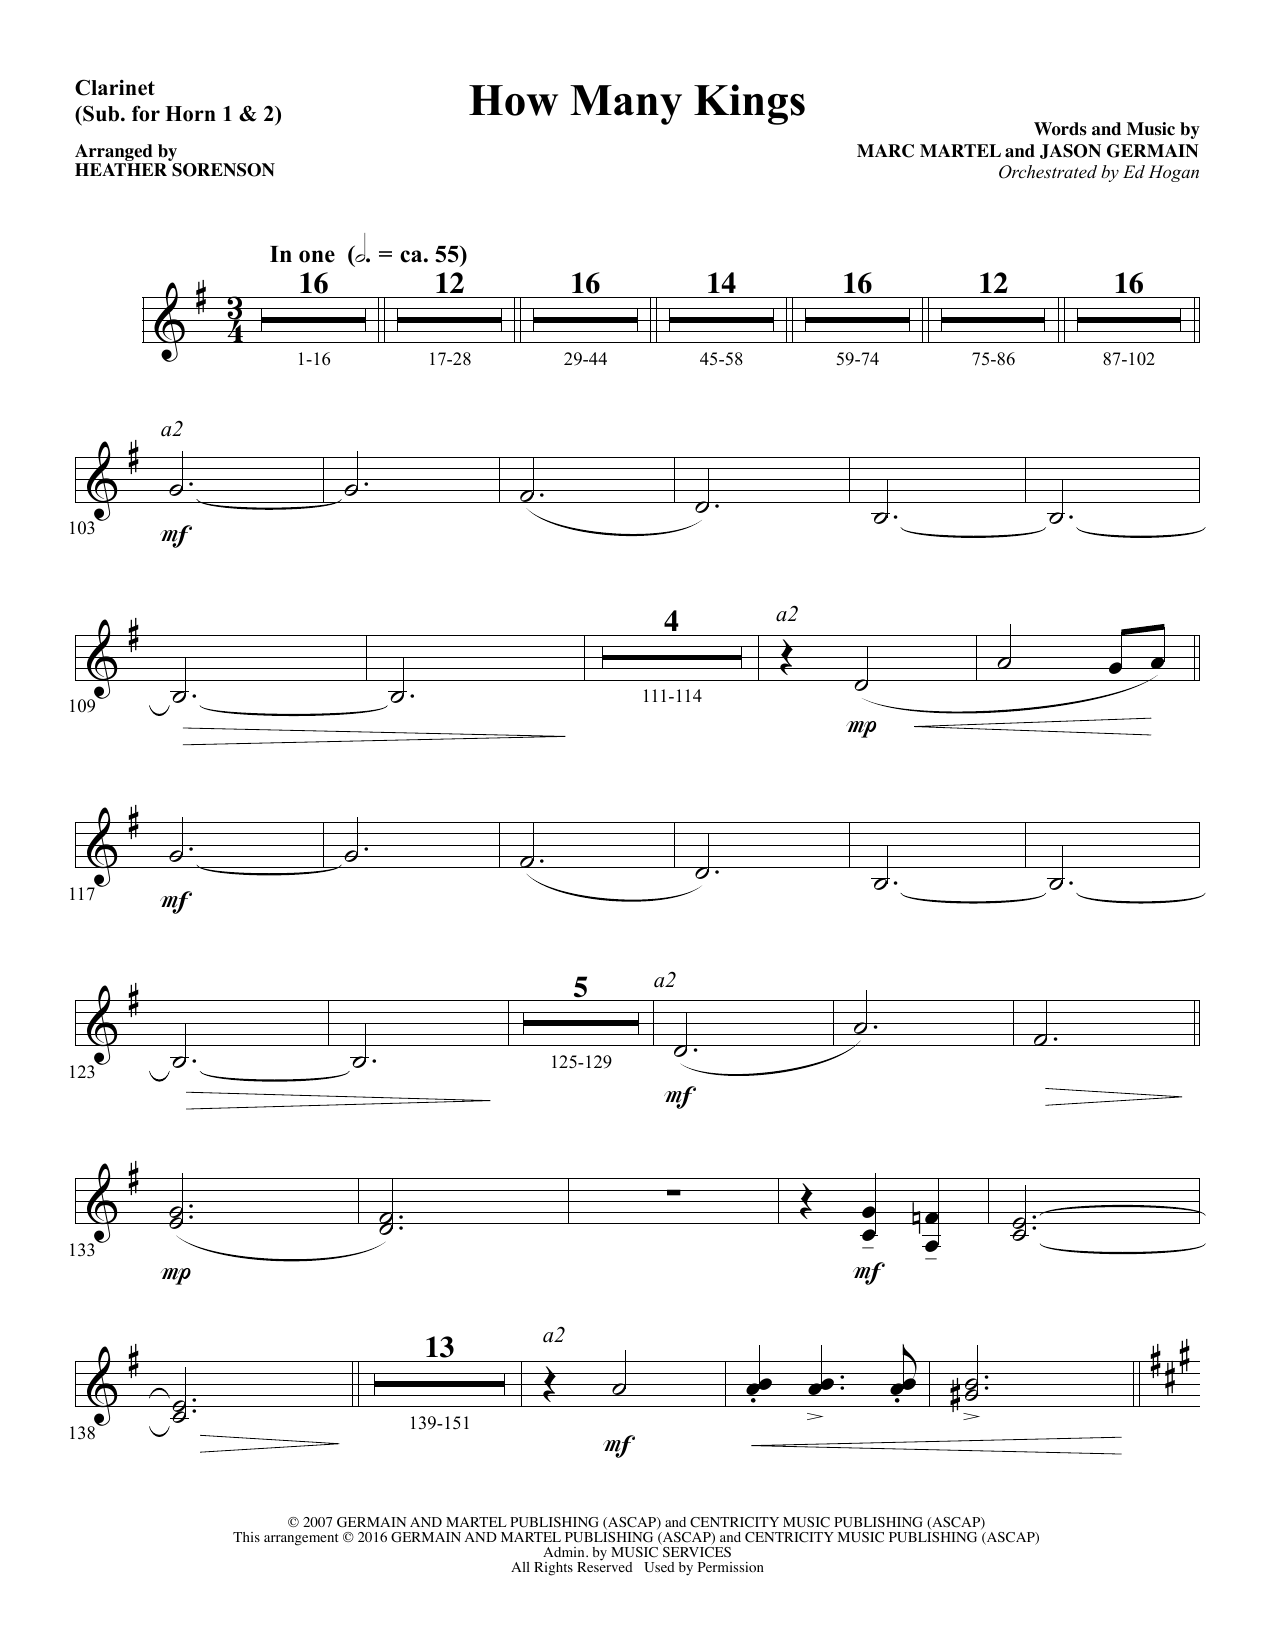 Download Heather Sorenson How Many Kings - Clarinet (sub. Horn 1-2) sheet music and printable PDF score & Christian music notes